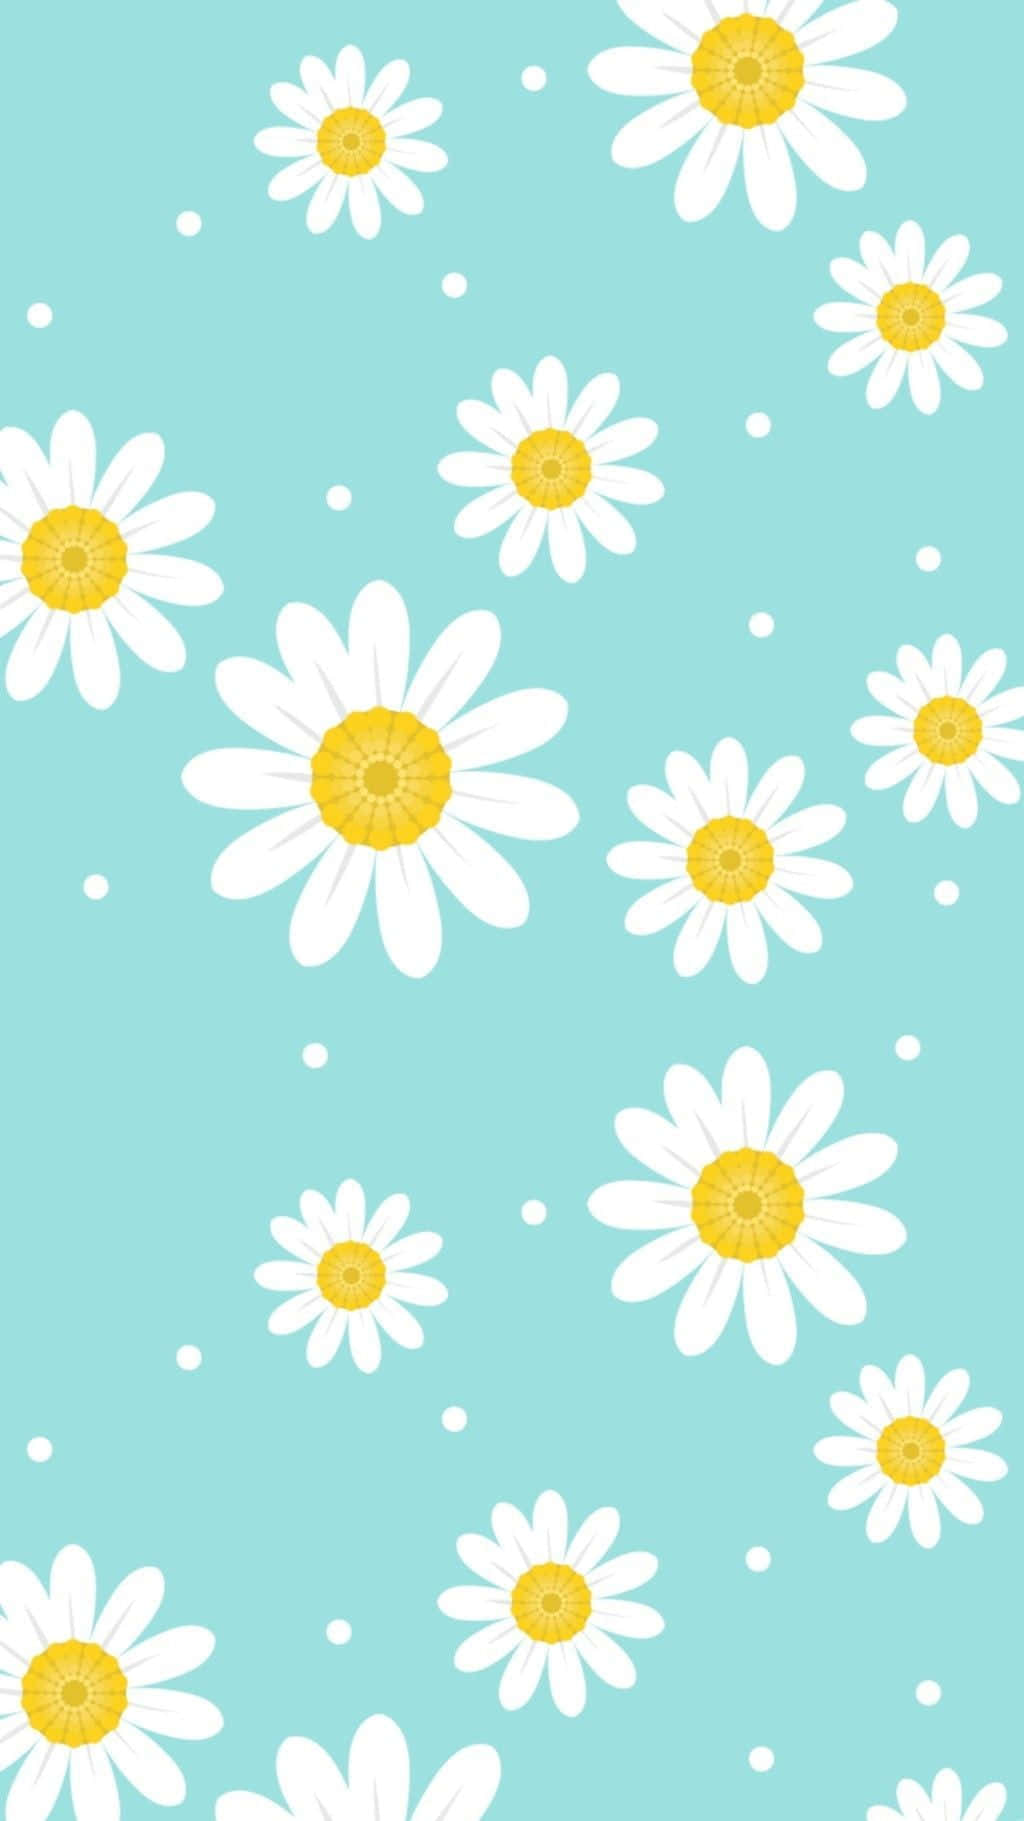 Download Cute and Colorful Kawaii Flower with a Smiling Face Wallpaper ...